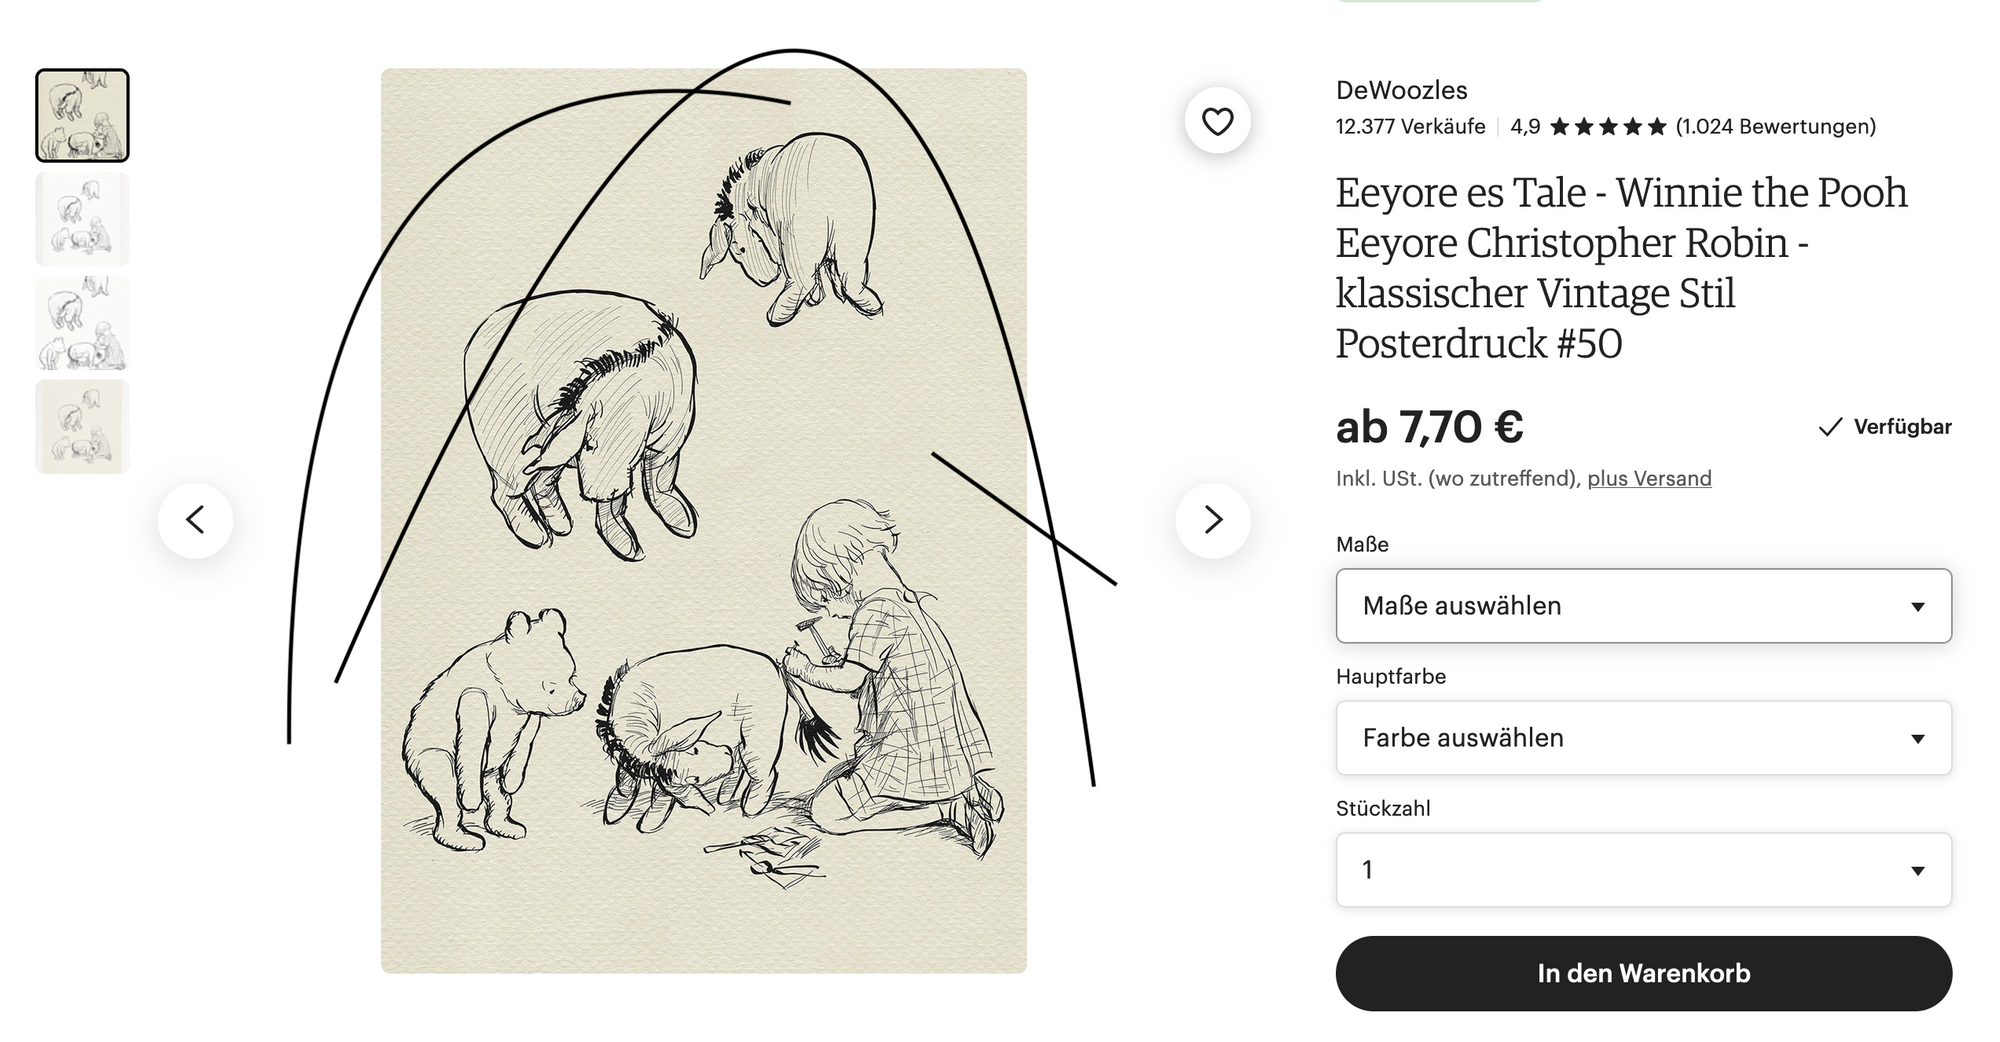 A black and white drawing of winnie the pooh and christopher robin pinning the tail on eeyore the donkey. The image is a screen shot of a print the artist is purchasing for €7,70.